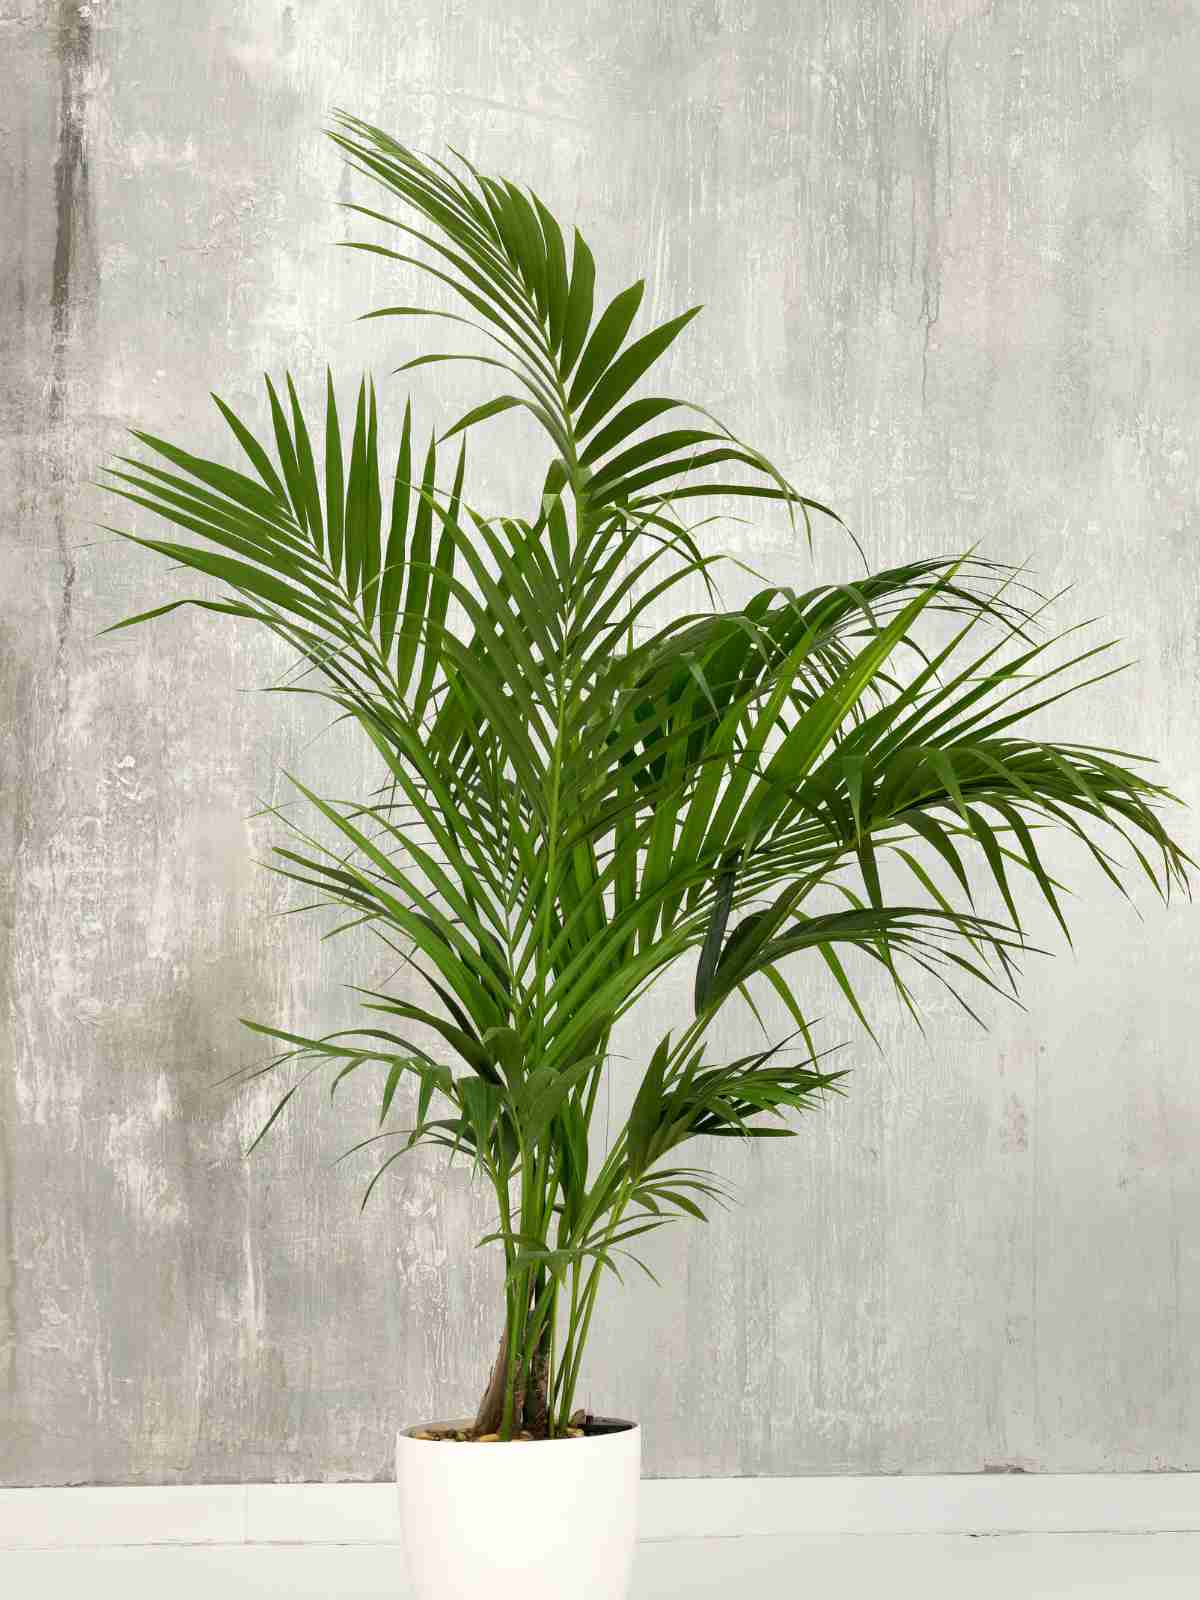 How to Grow and Care for Kentia Palm Tree Indoors